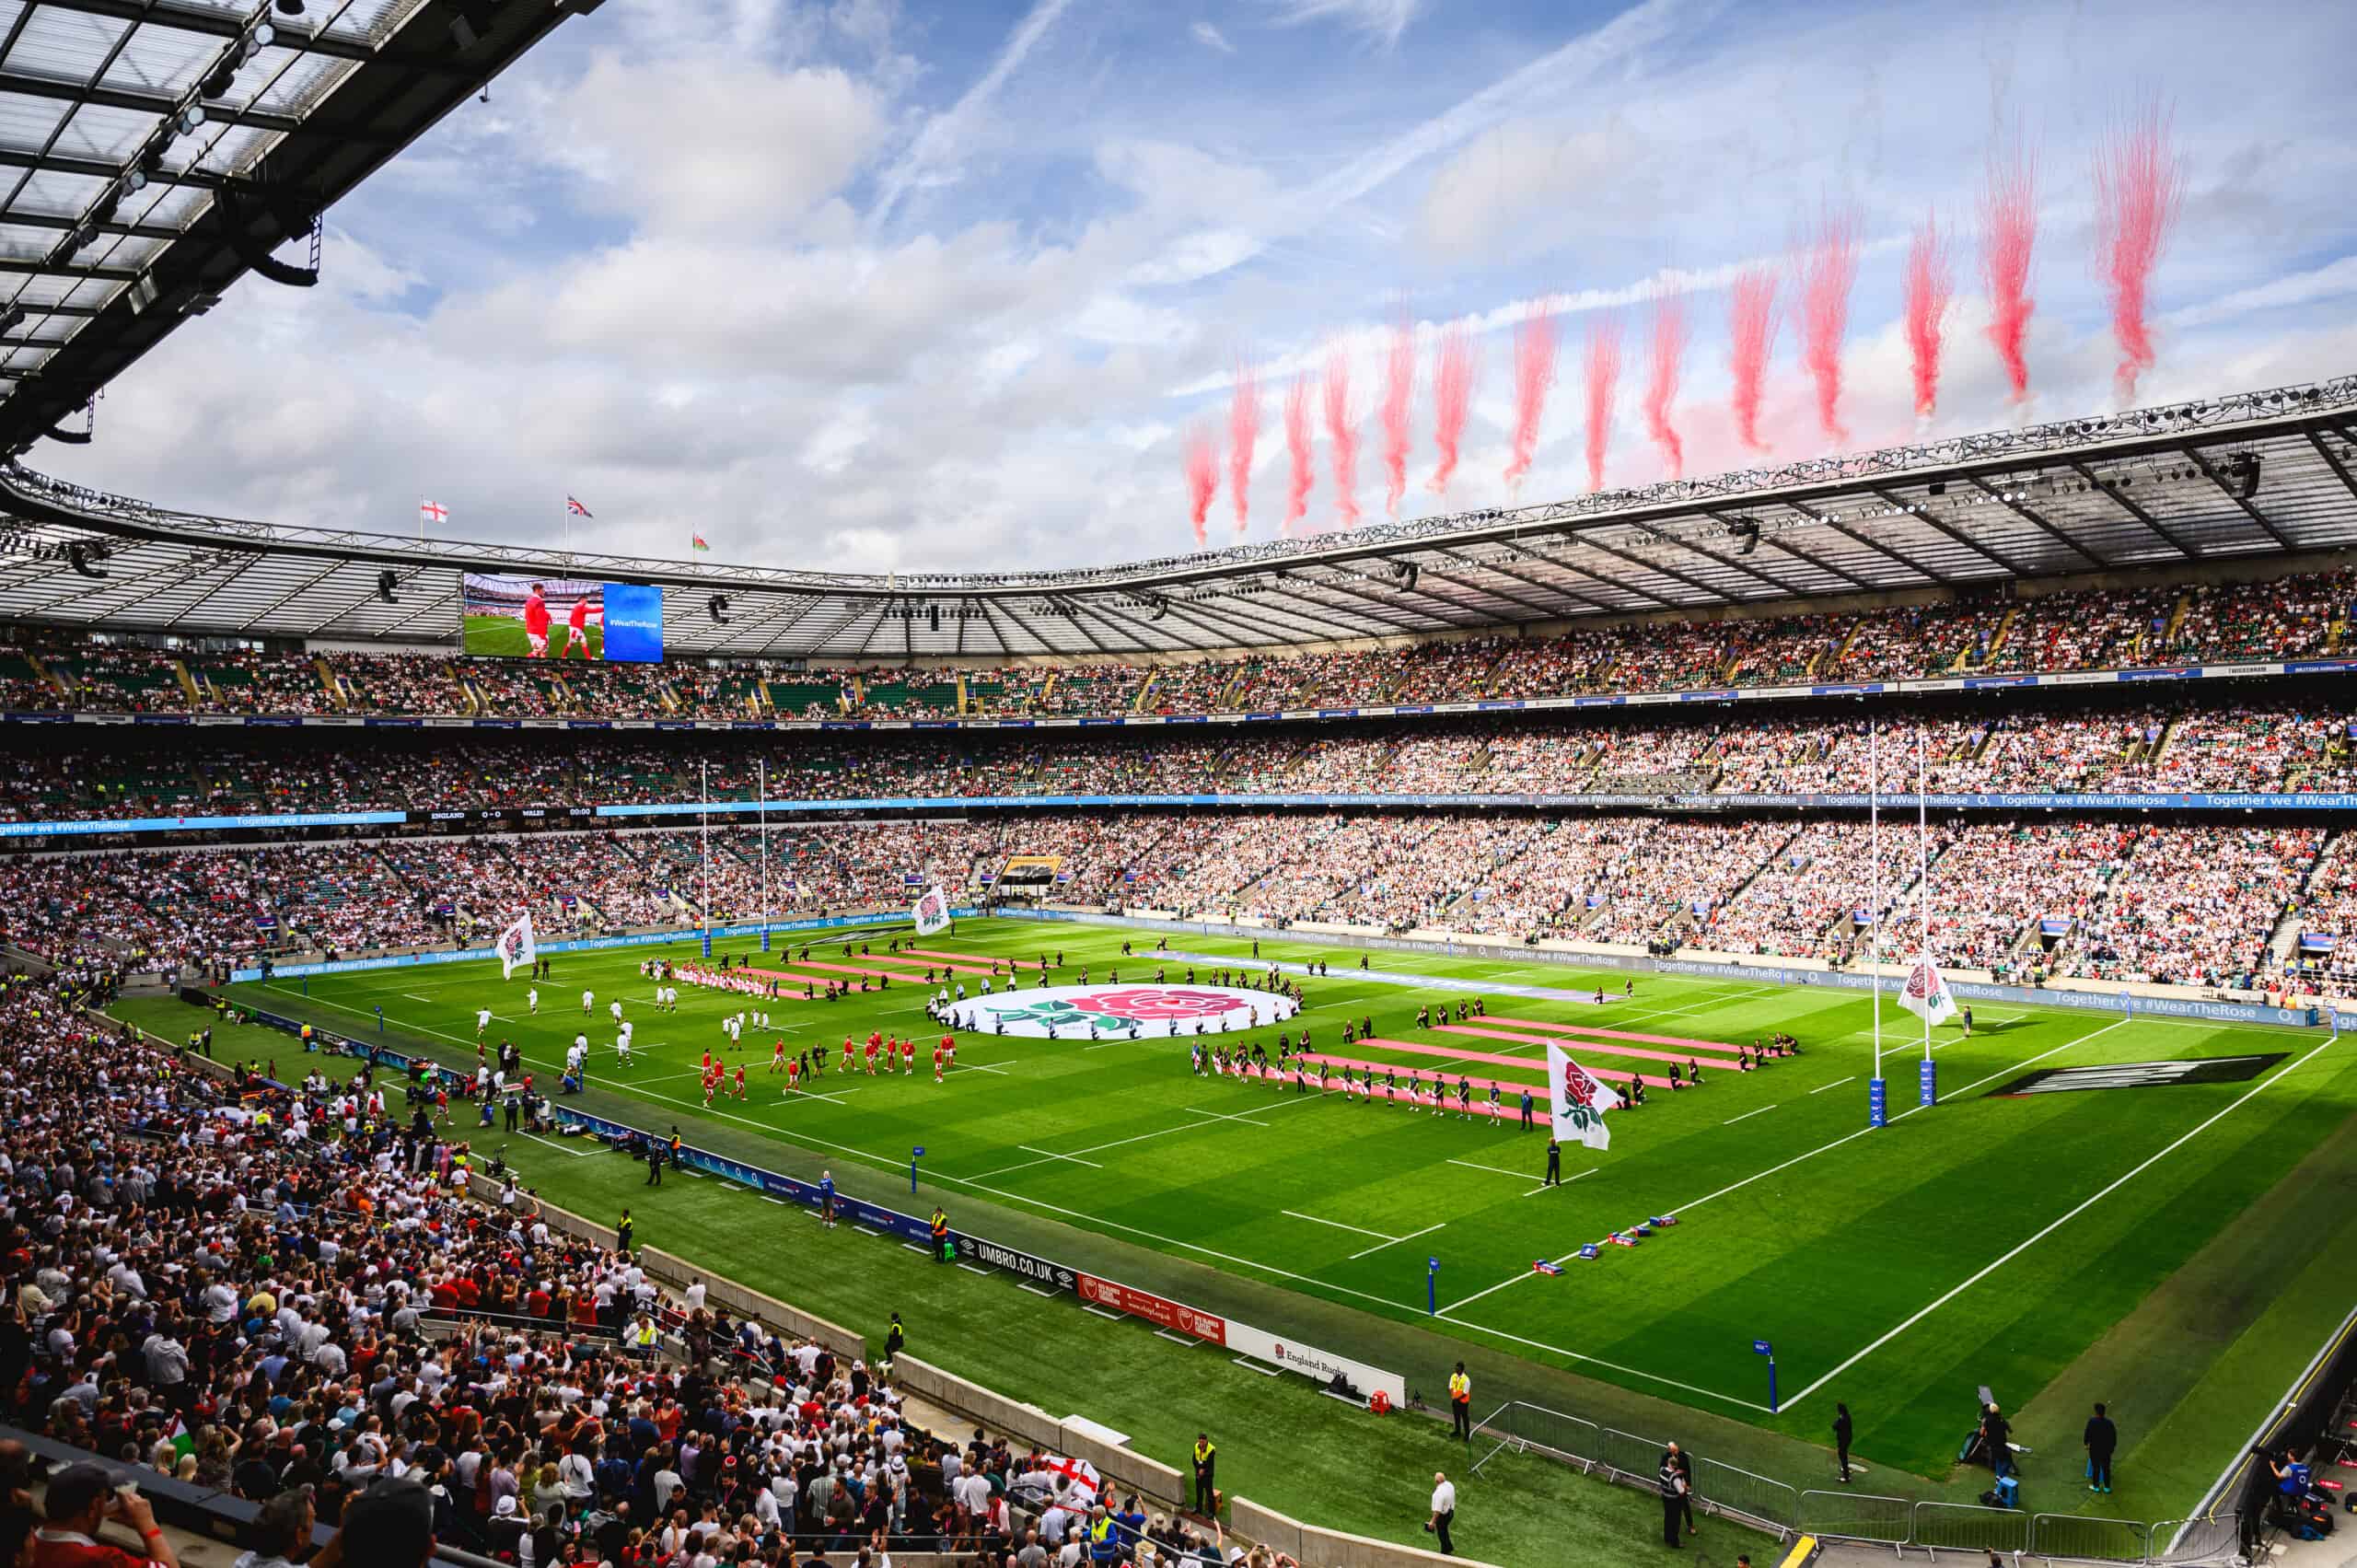 Fireworks go off over Twickenham as England and Wales come from the tunnel ahead of their Summer Nations Series fixture in preparation for the 2023 Rugby World Cup